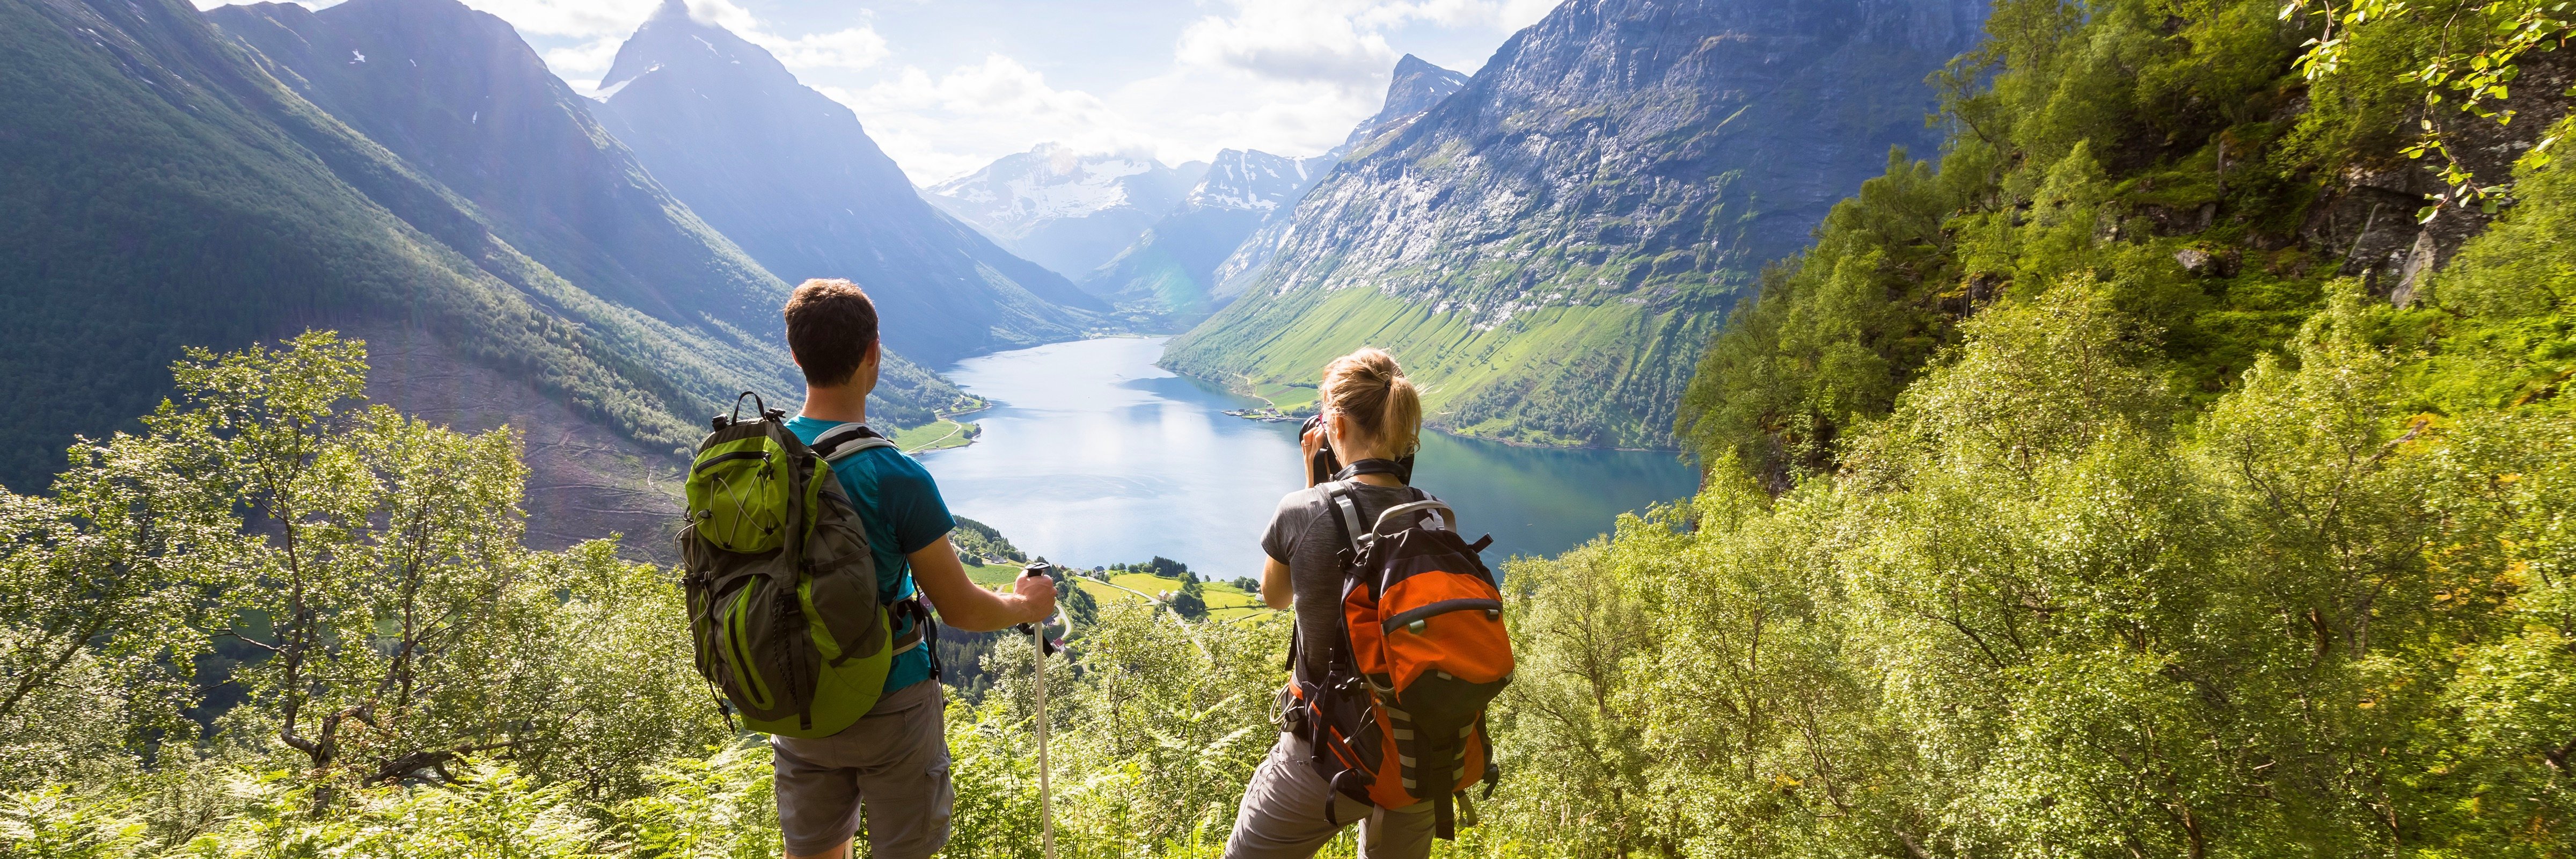 Two backpackers standing at the mouth of a valley, looking at a blue mountain lake